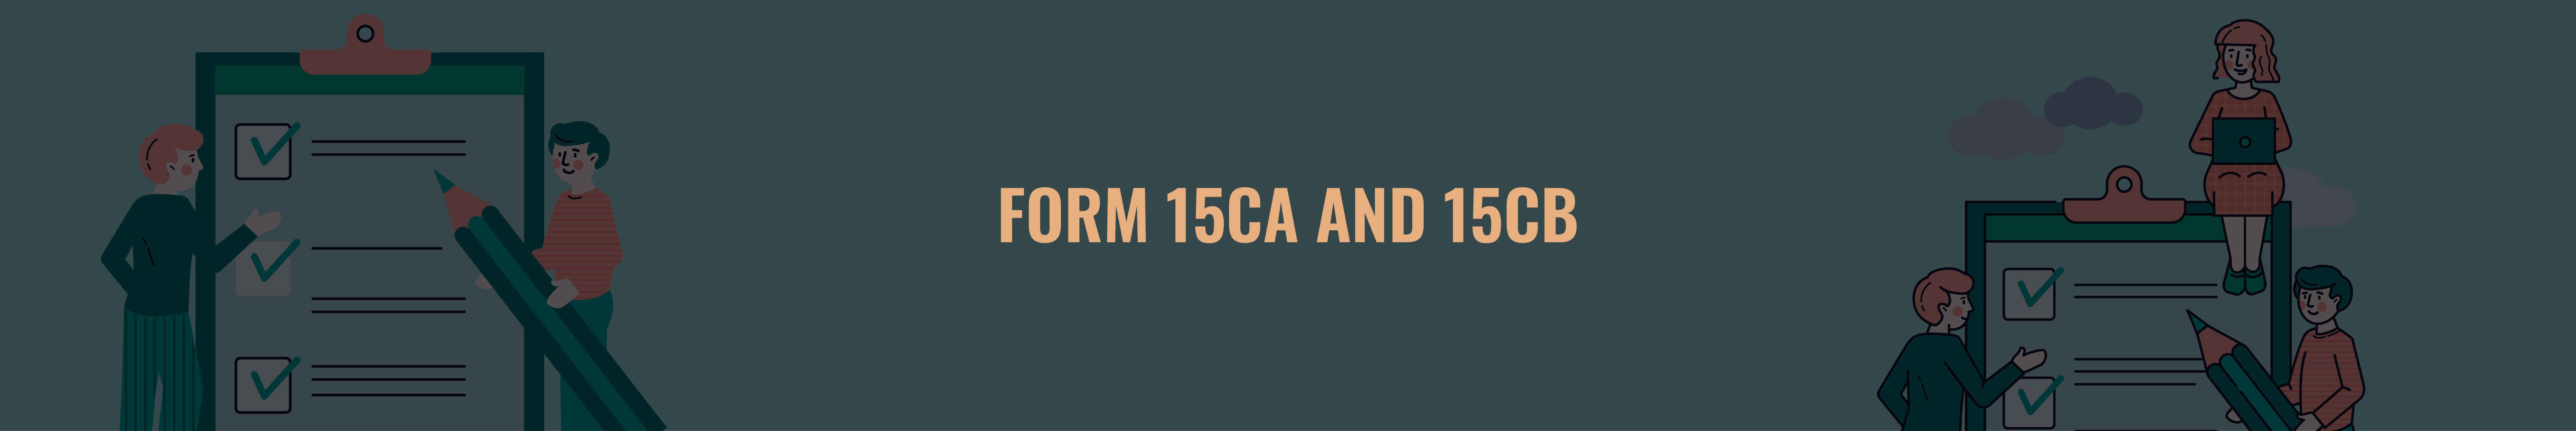 Filing of Forms 15CA-15CB